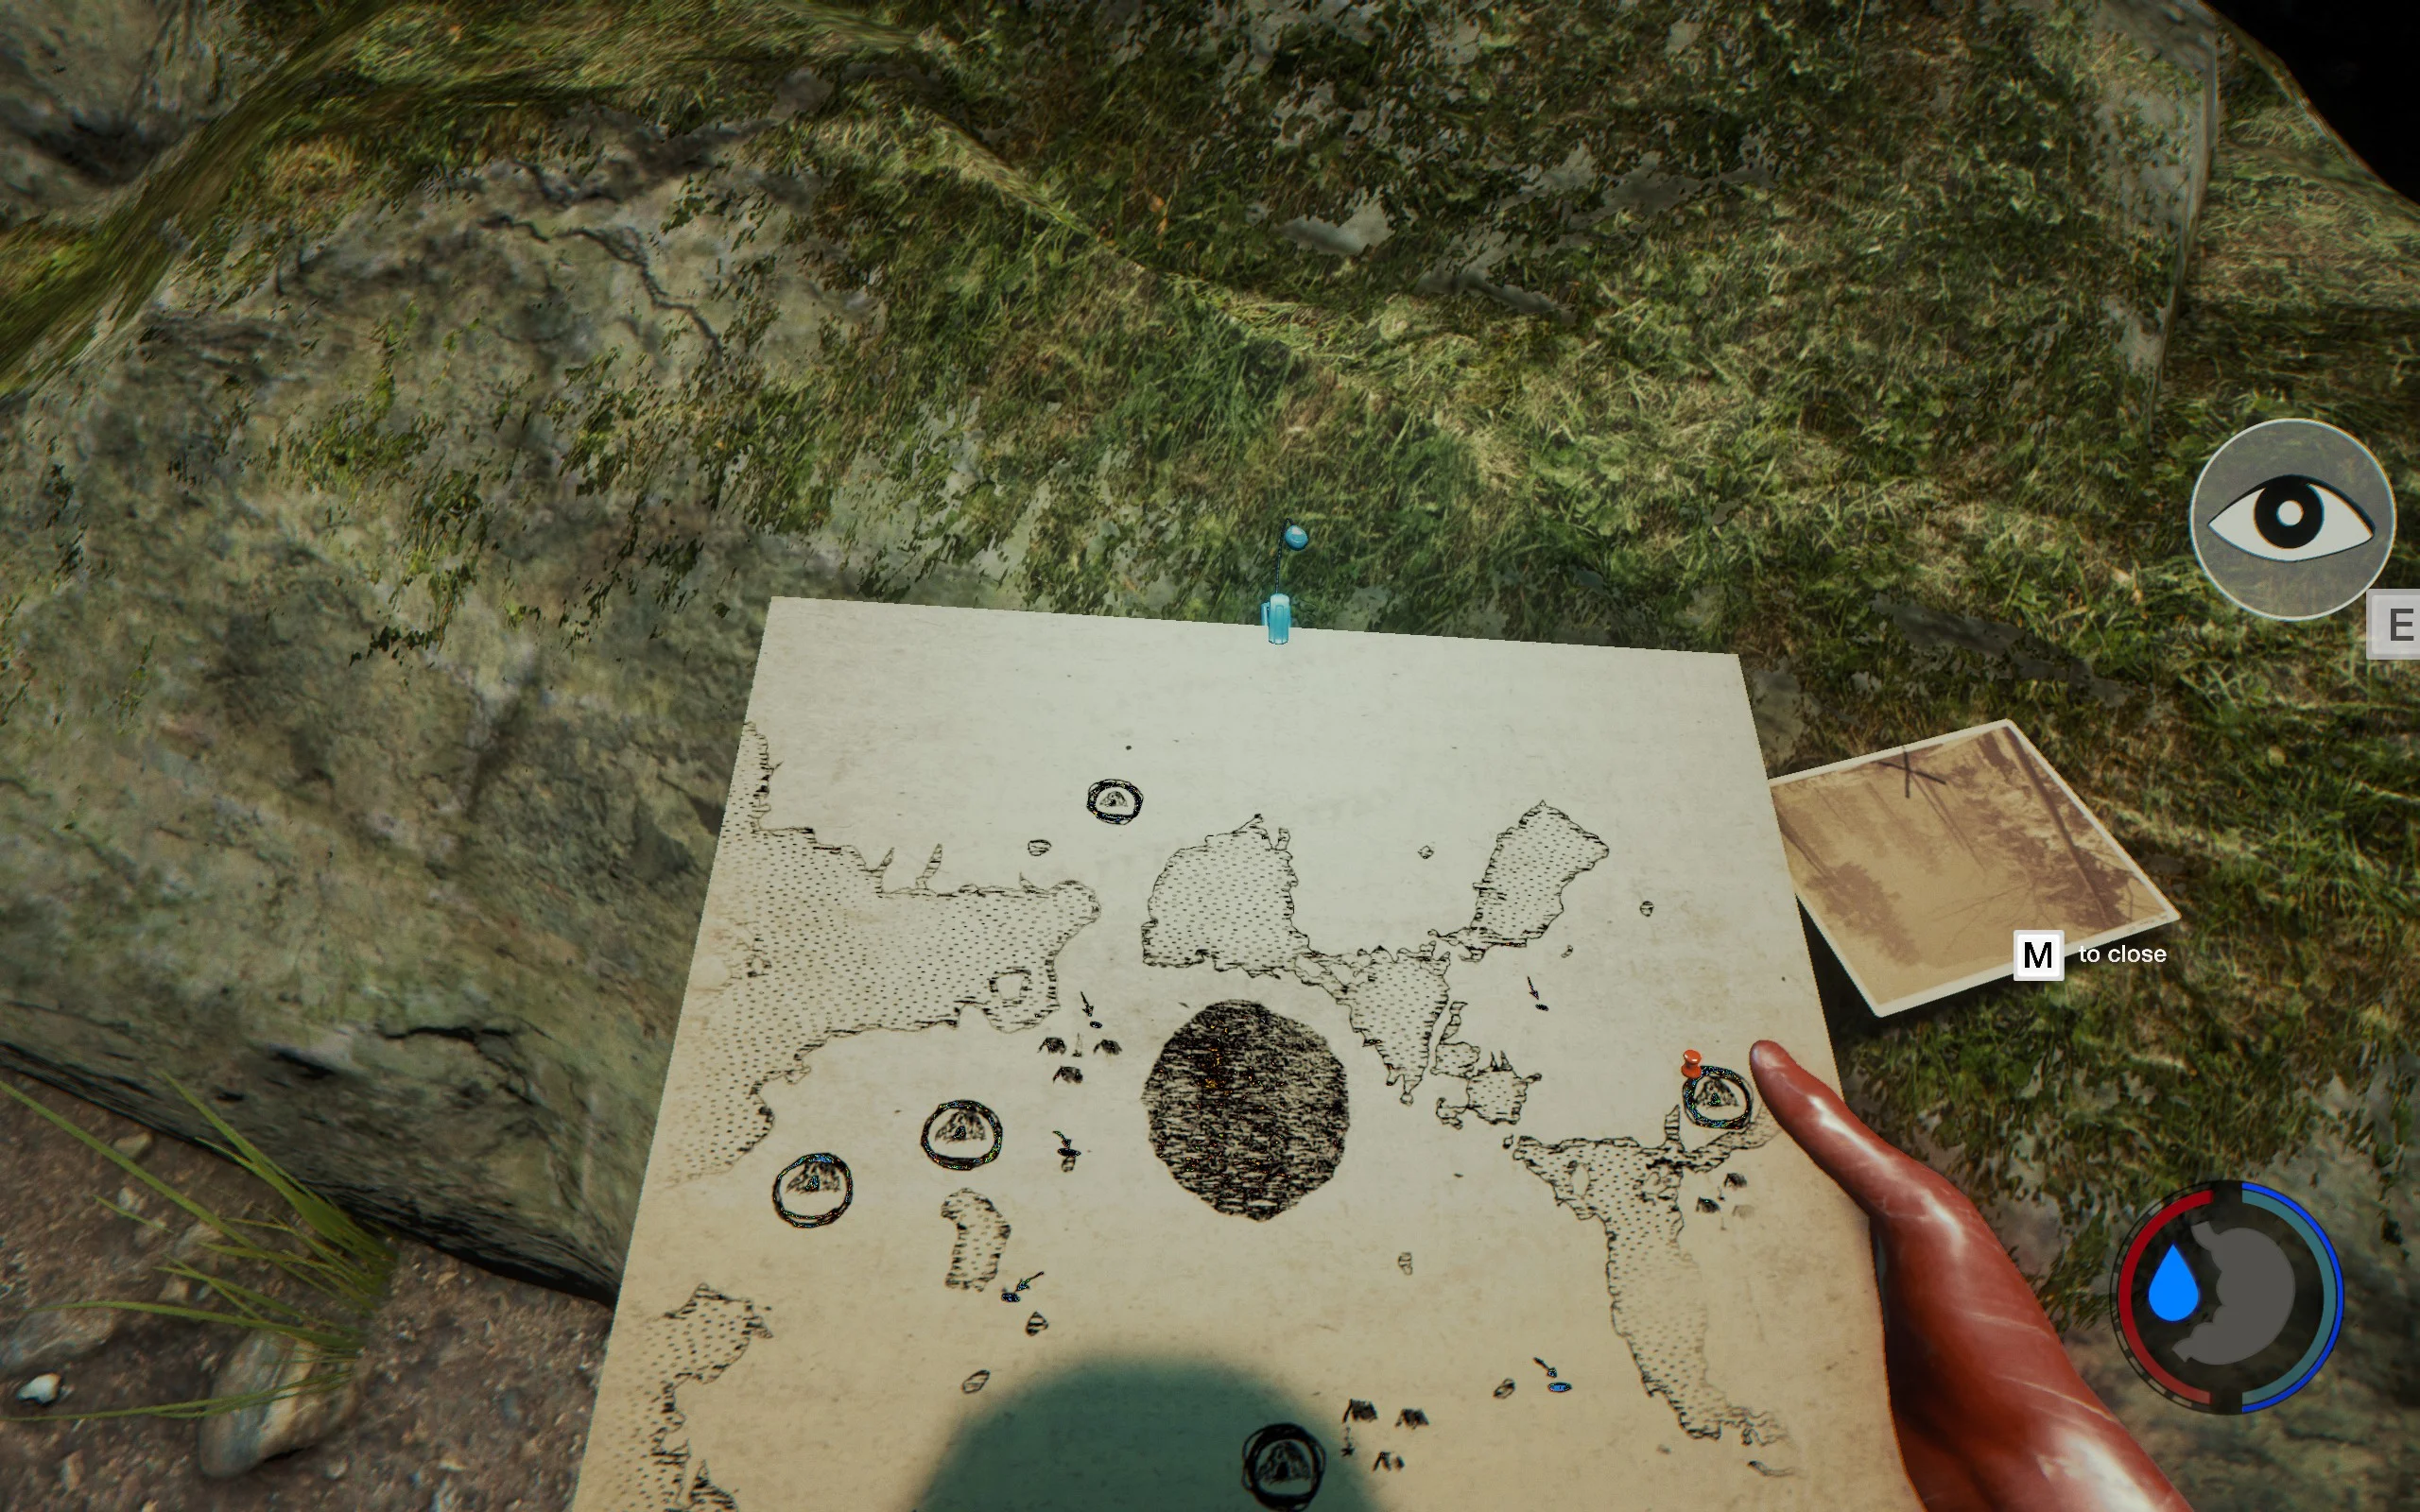 Interactive The Forest Map. Locations of items, tools, utilities, caves and  more.